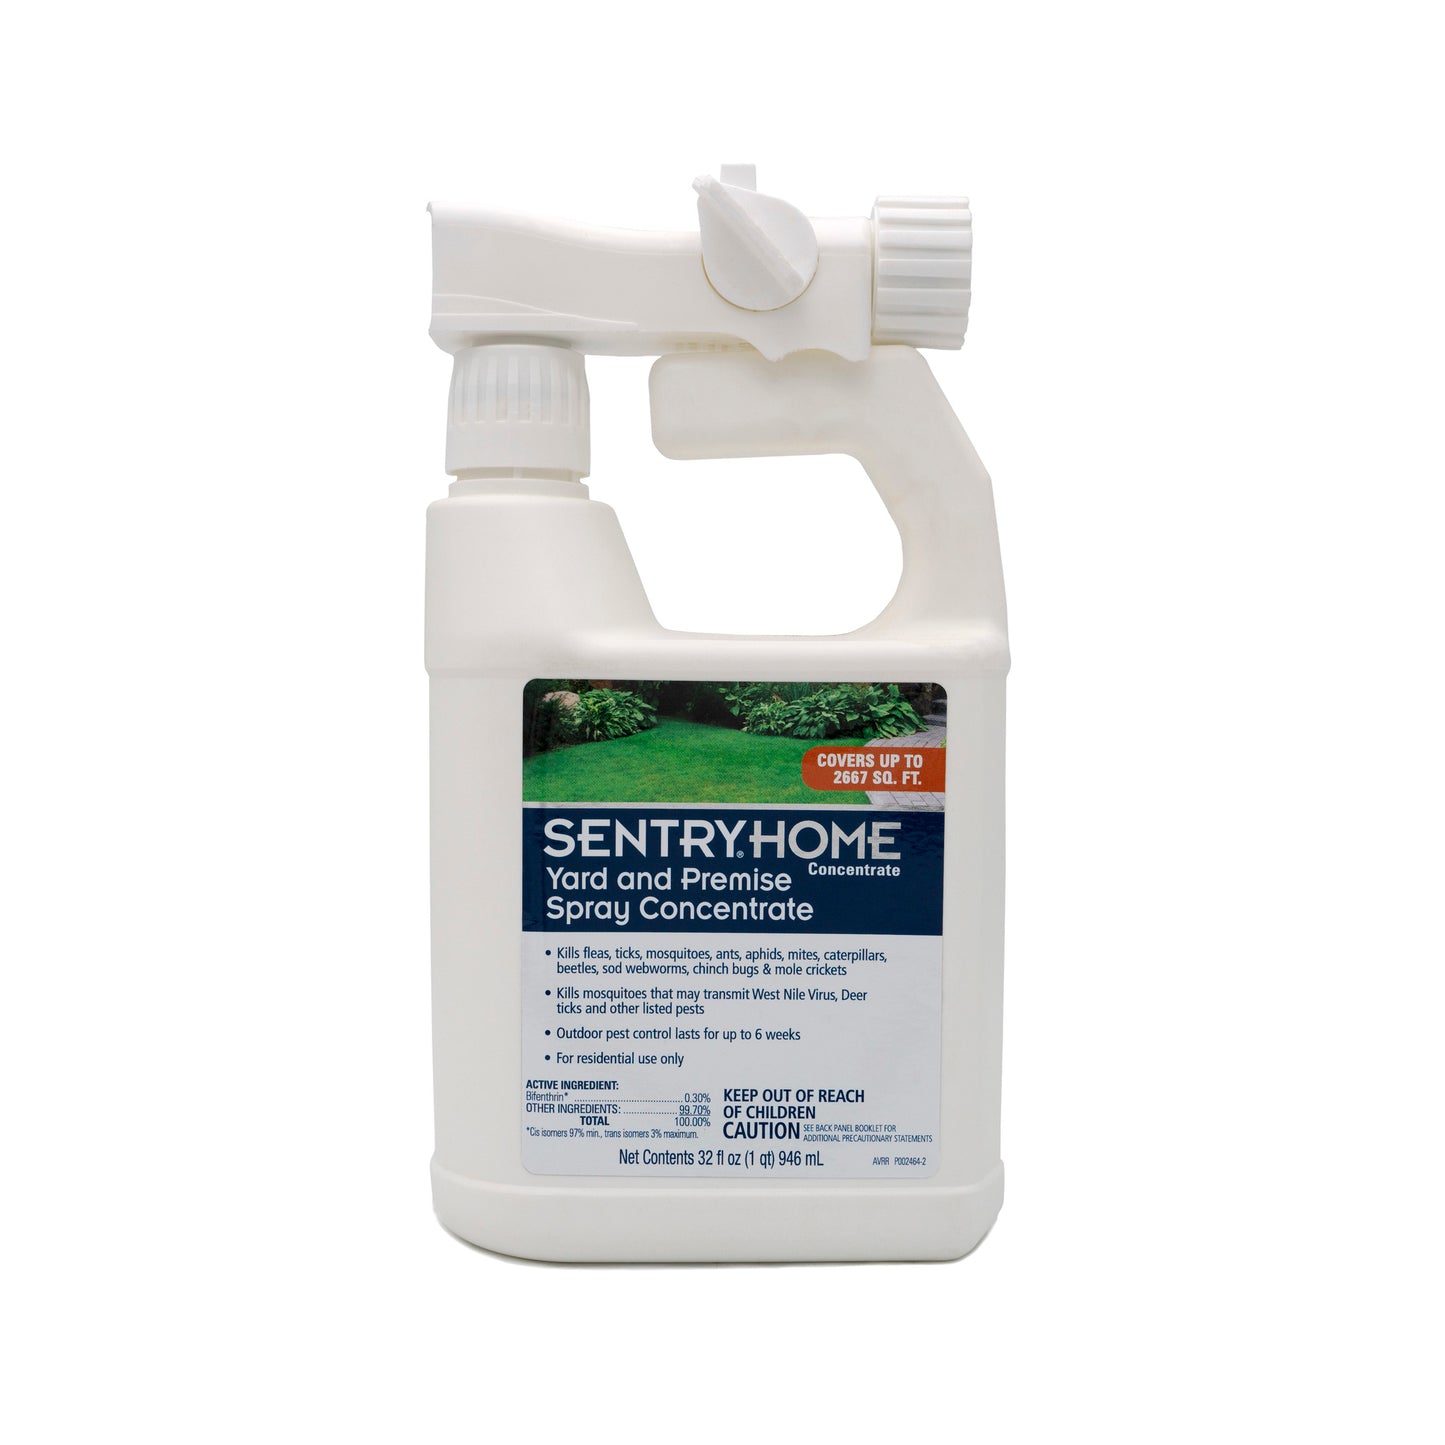 Sentry Home Yard and Premise Spray Concentrate